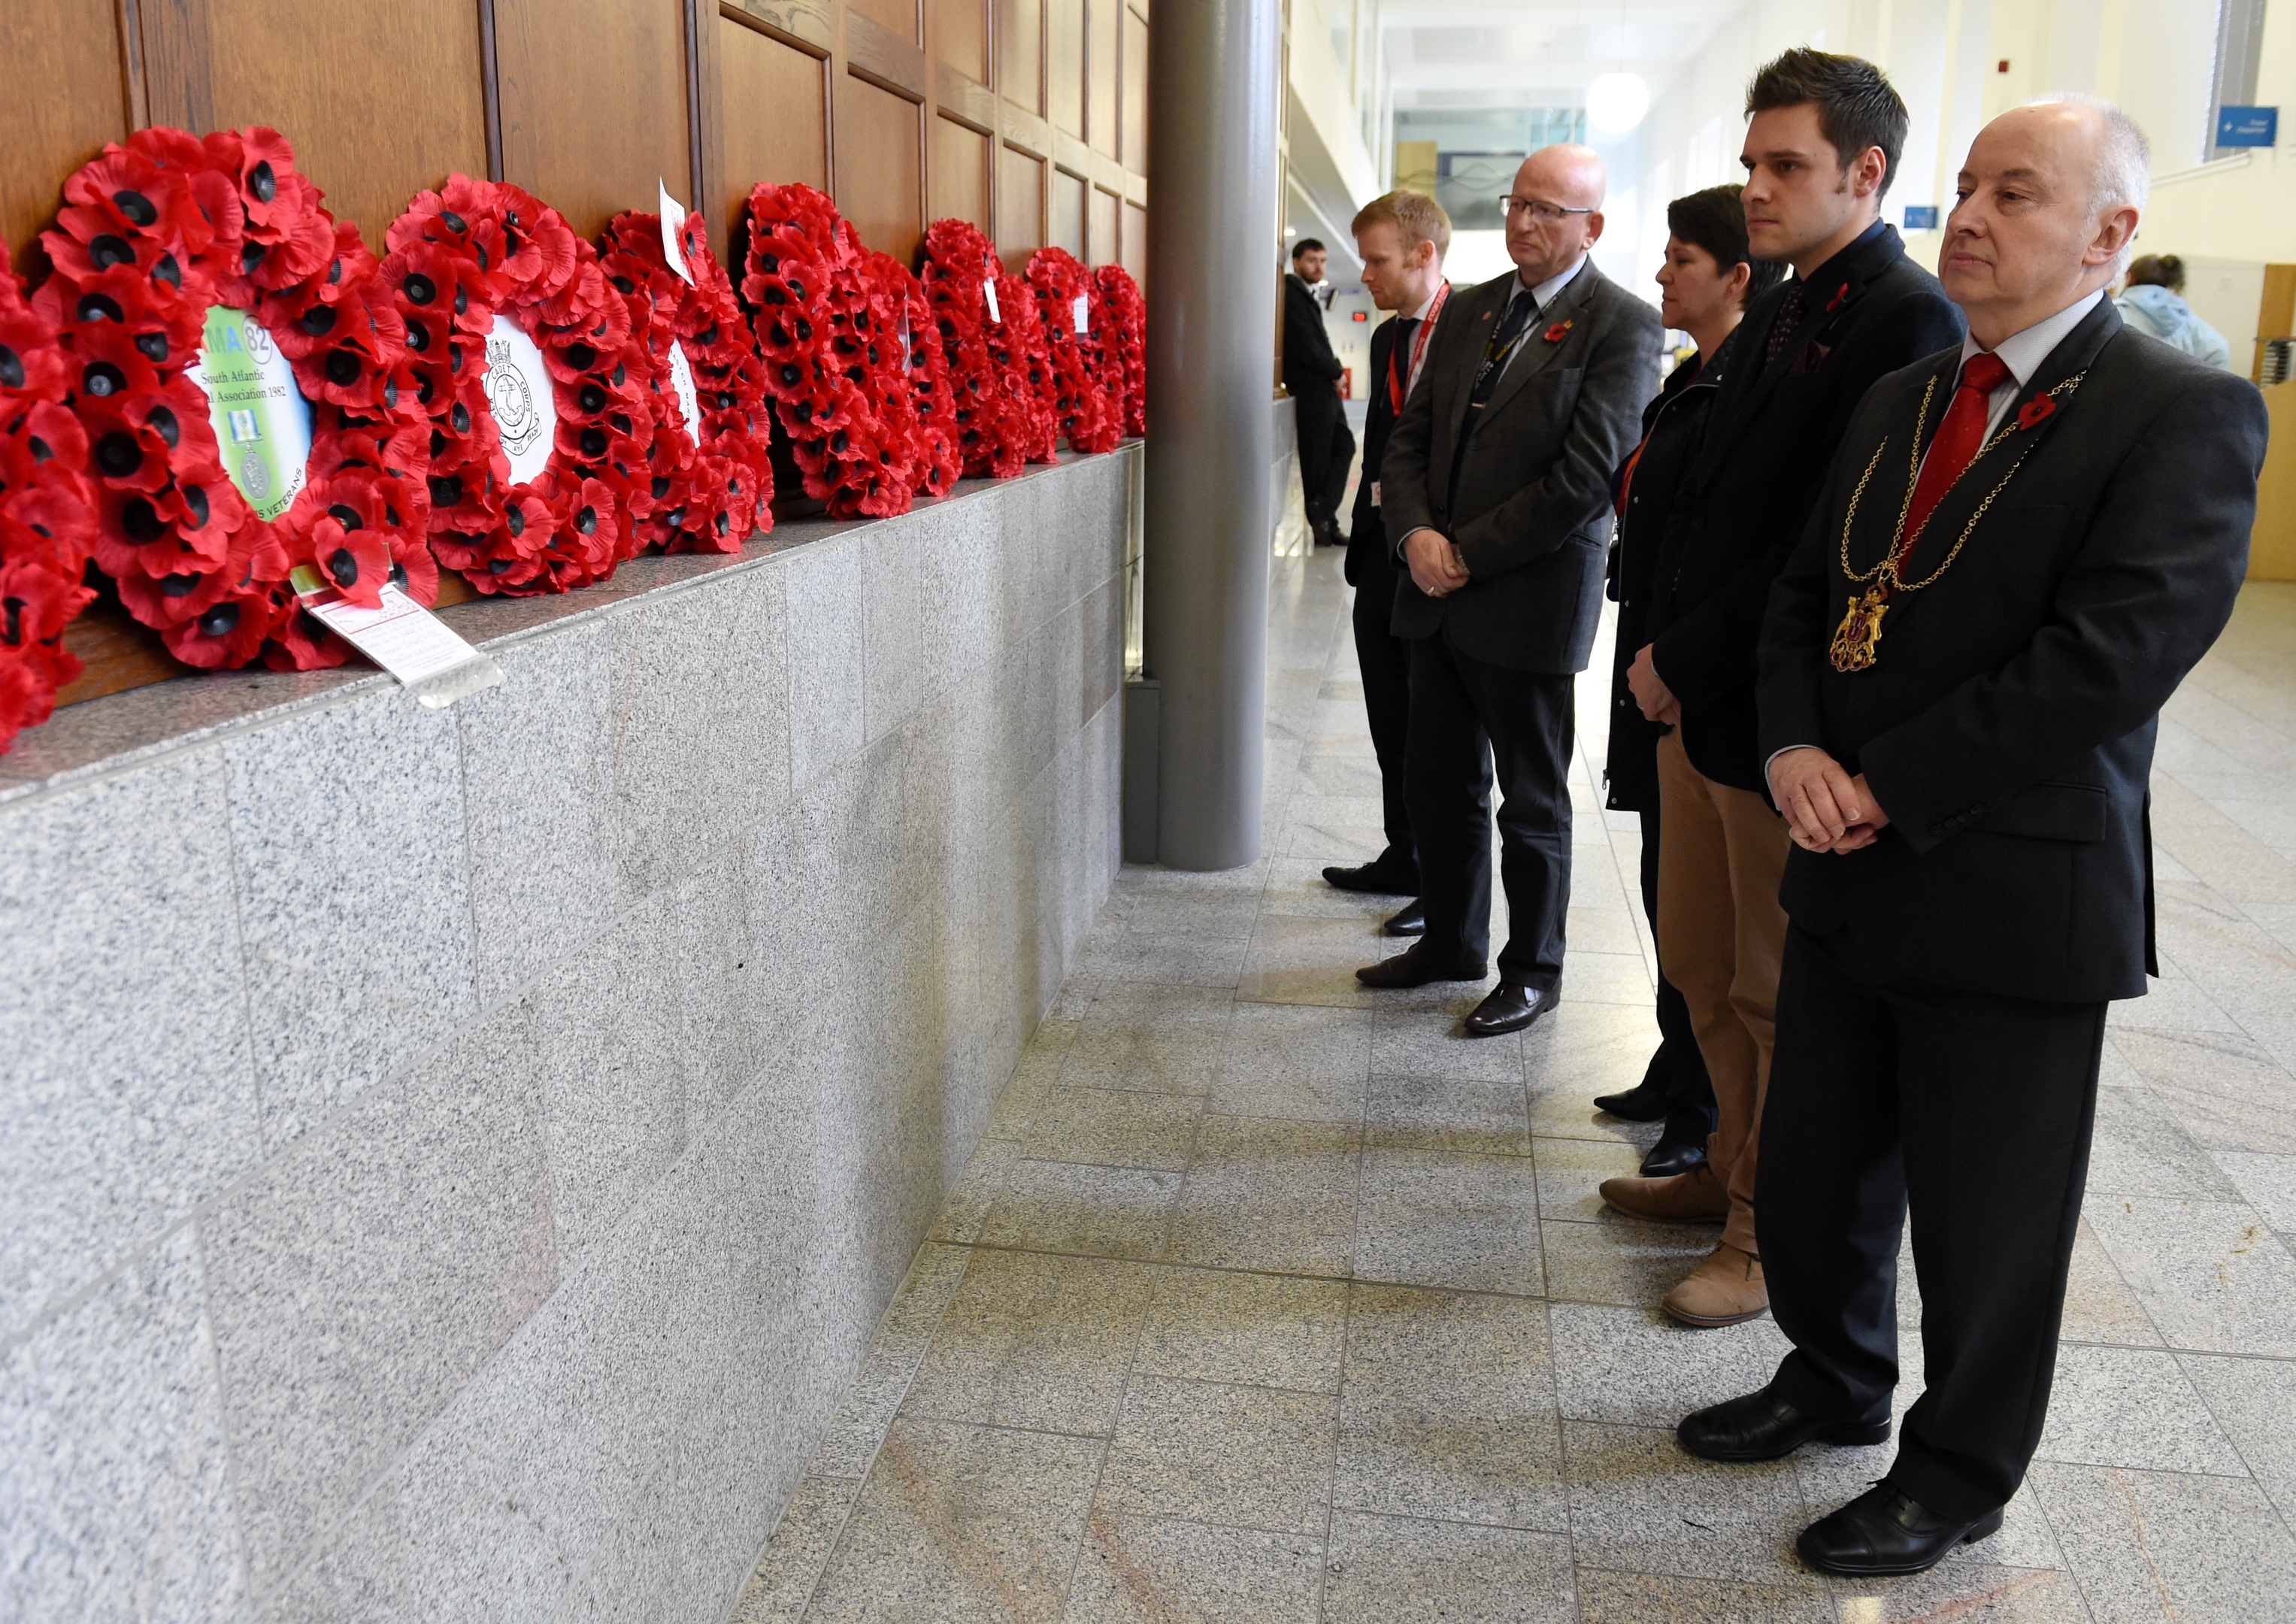 Aberdeen Lord Provost George Adam joined council staff and members of the public at Marischal College customer service area to remember the nation's war dead, and observe the national two-minute silence. 